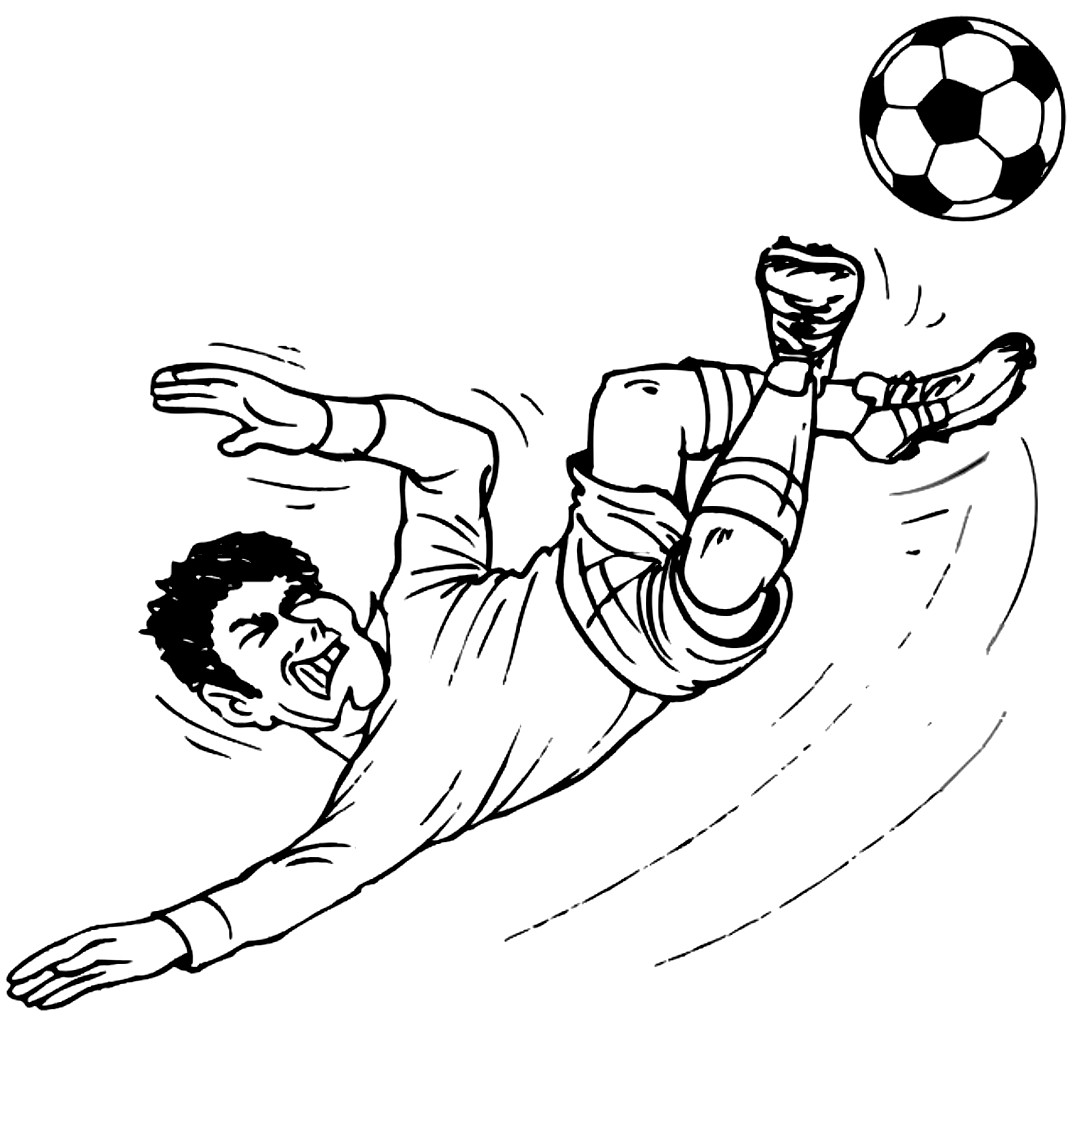 Soccer 16 drawing to print and color